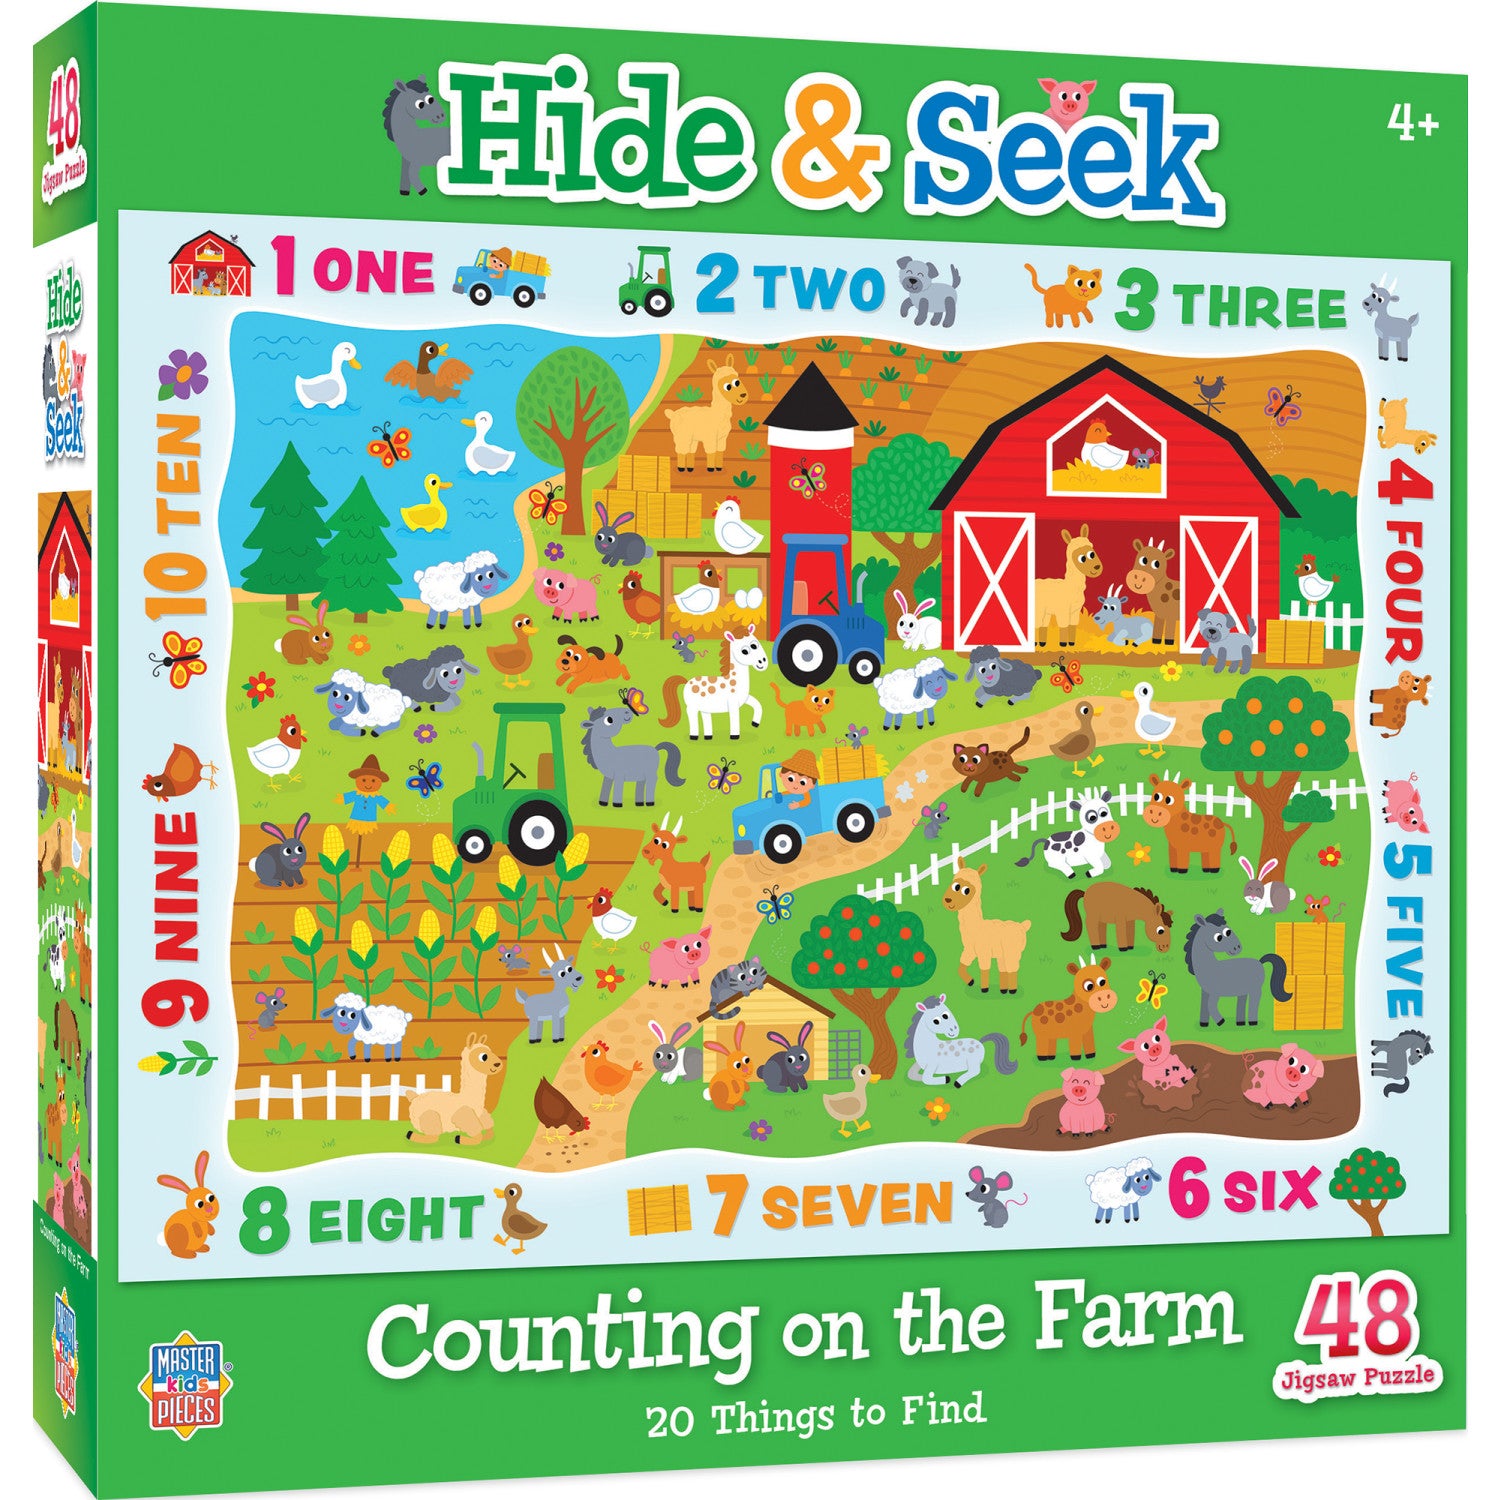 Hide & Seek - Counting on the Farm 48 Piece Jigsaw Puzzle